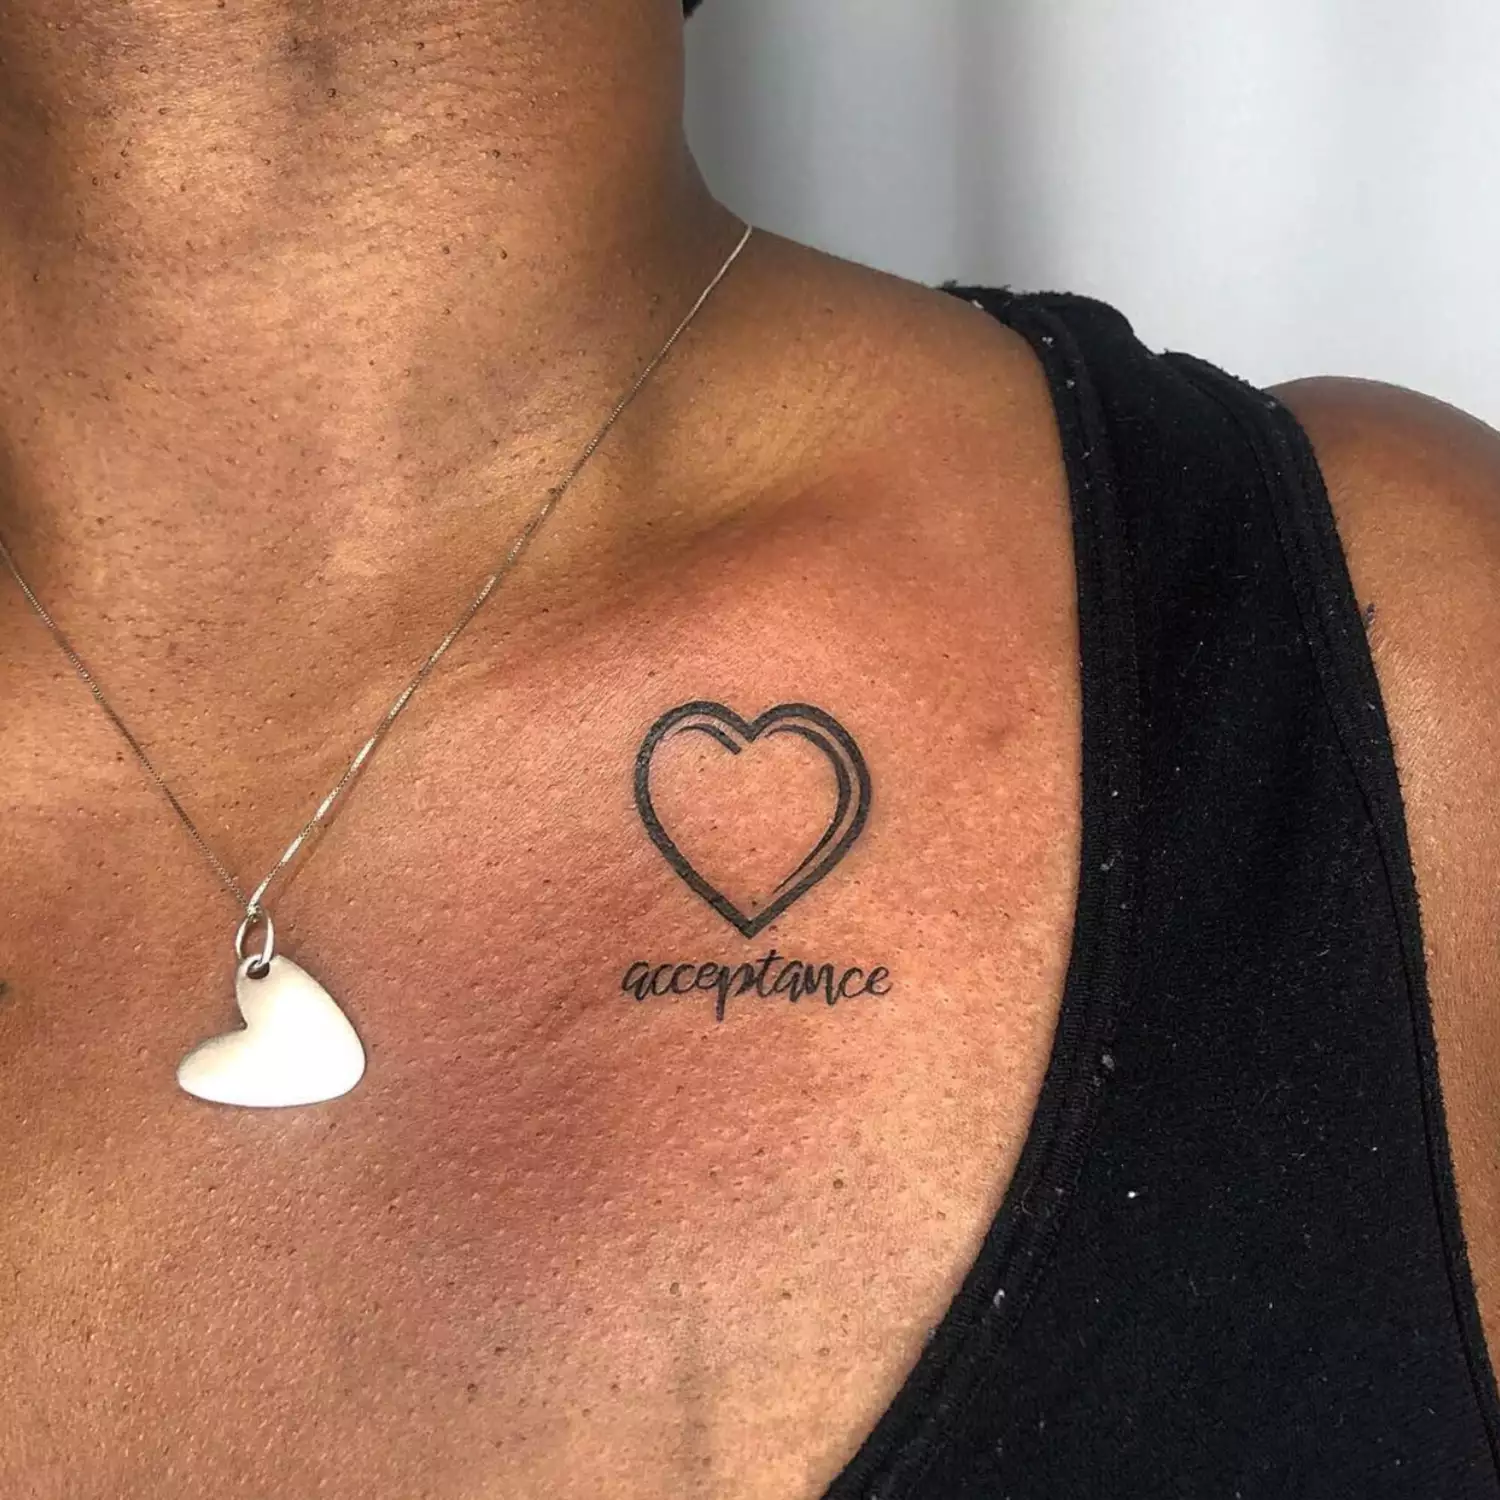 A cartoon heart with the word "acceptance" written in script below it. The tattoo is on the side of the clavicle.